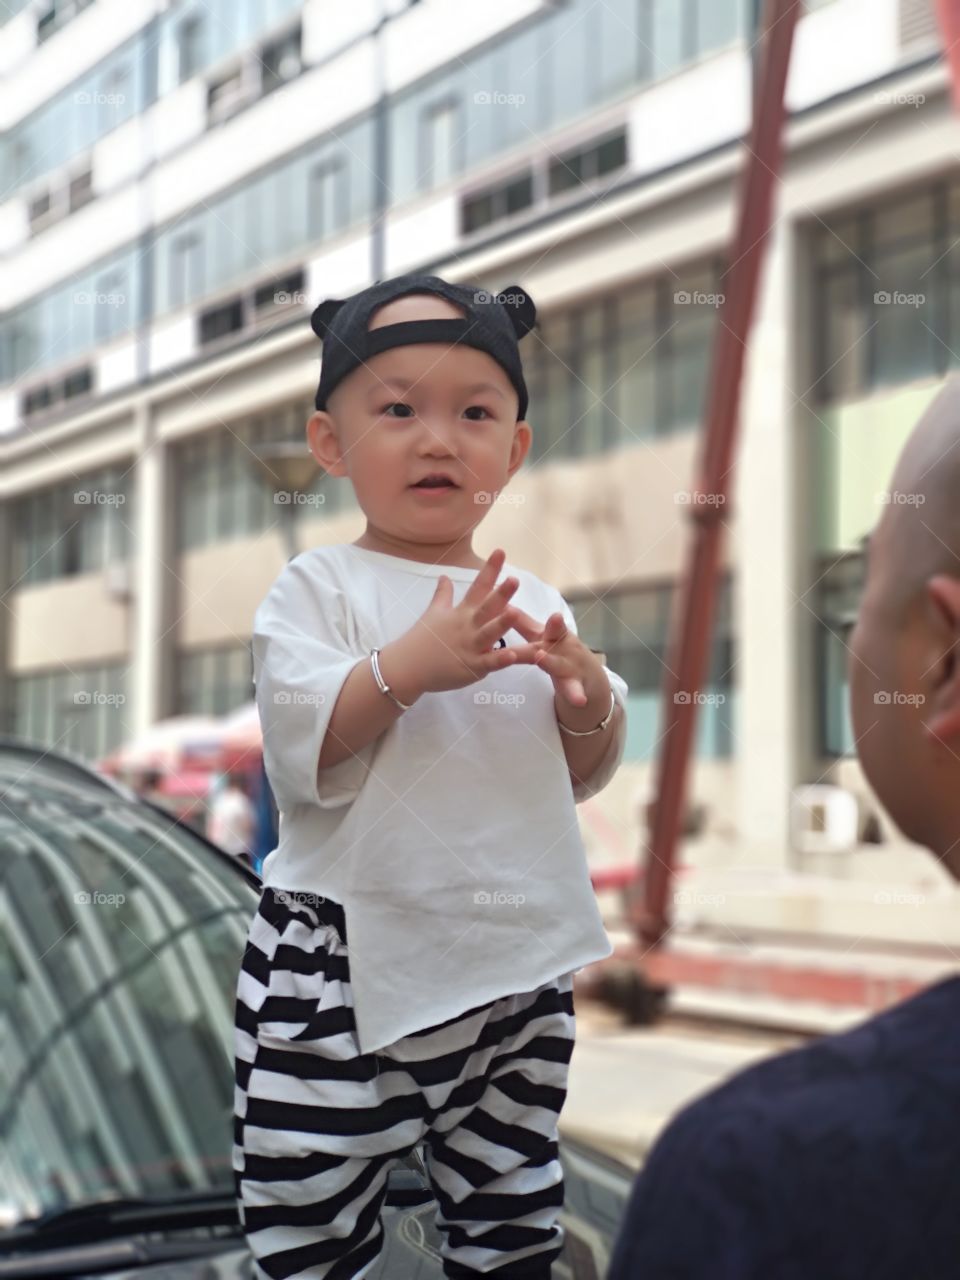 Don't think wrong. It's not a doll. Chinese cute baby. Pretty Cute